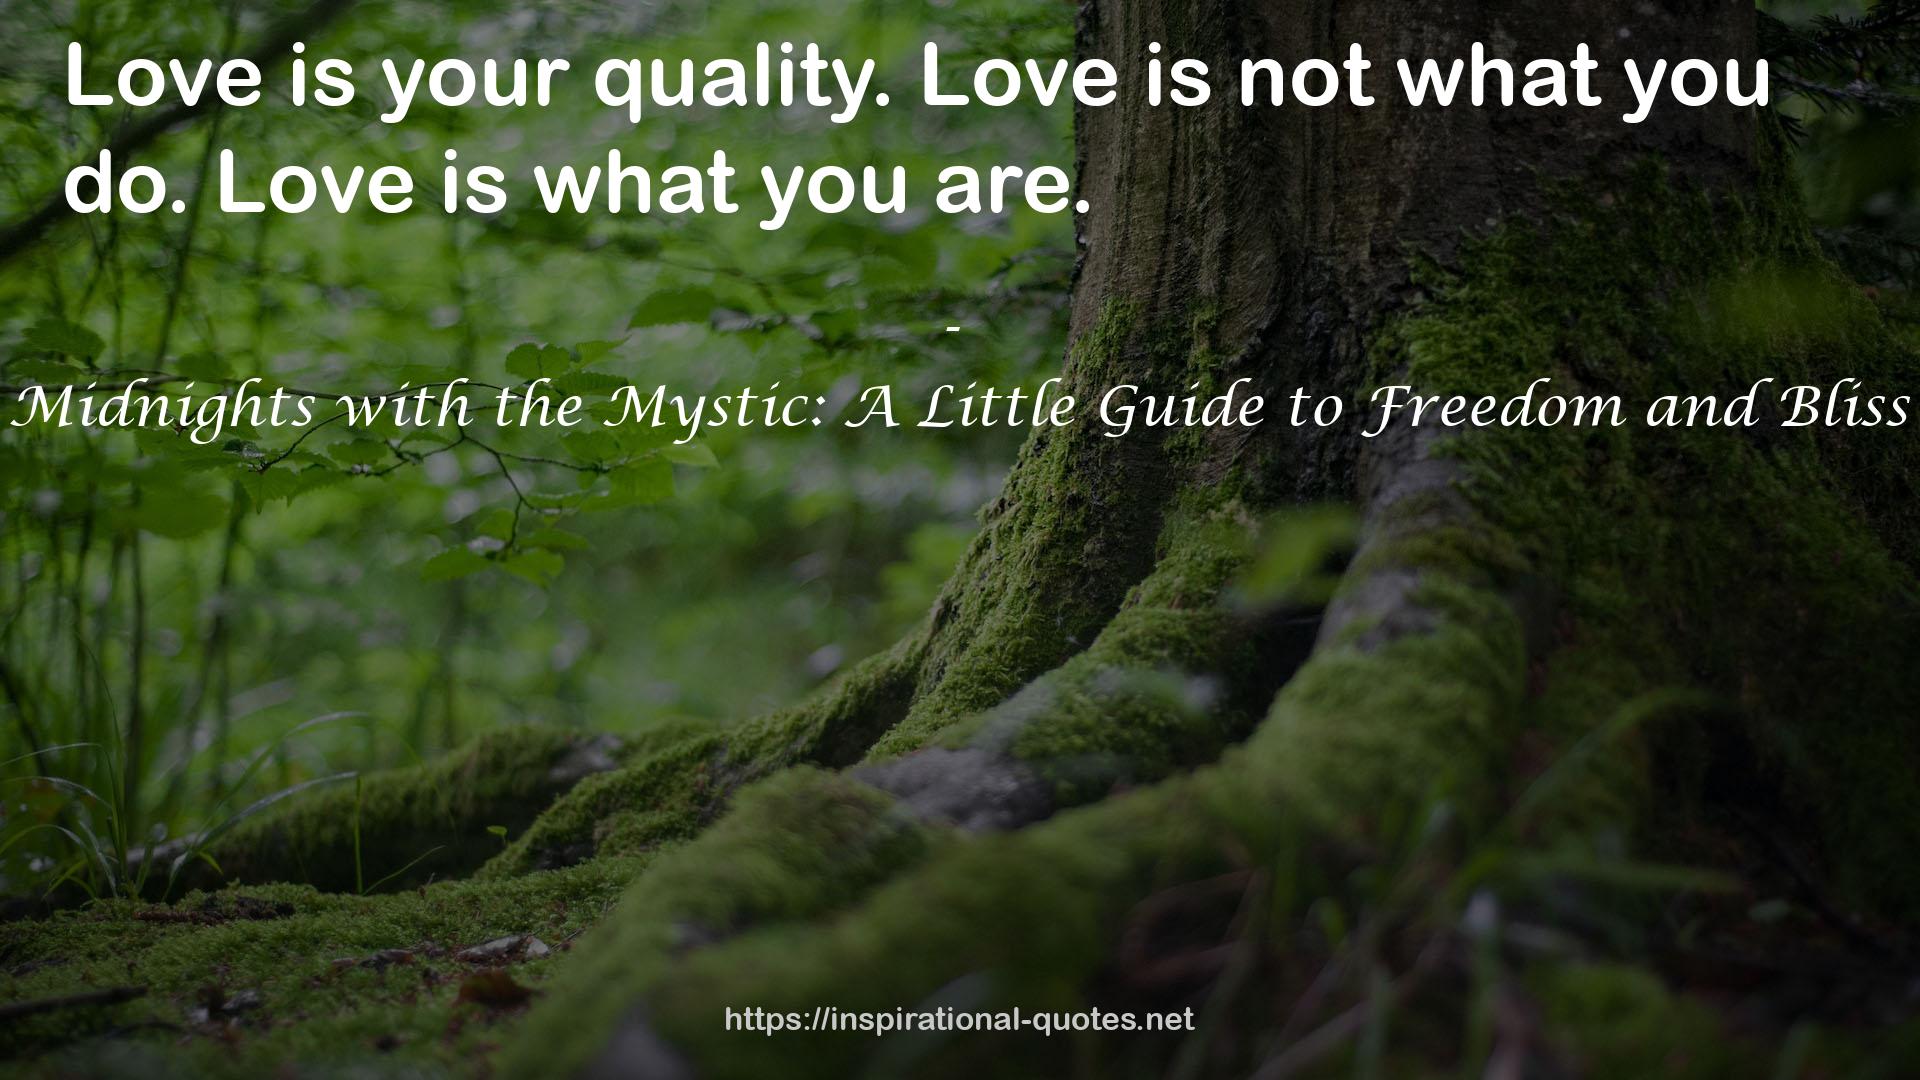 Midnights with the Mystic: A Little Guide to Freedom and Bliss QUOTES